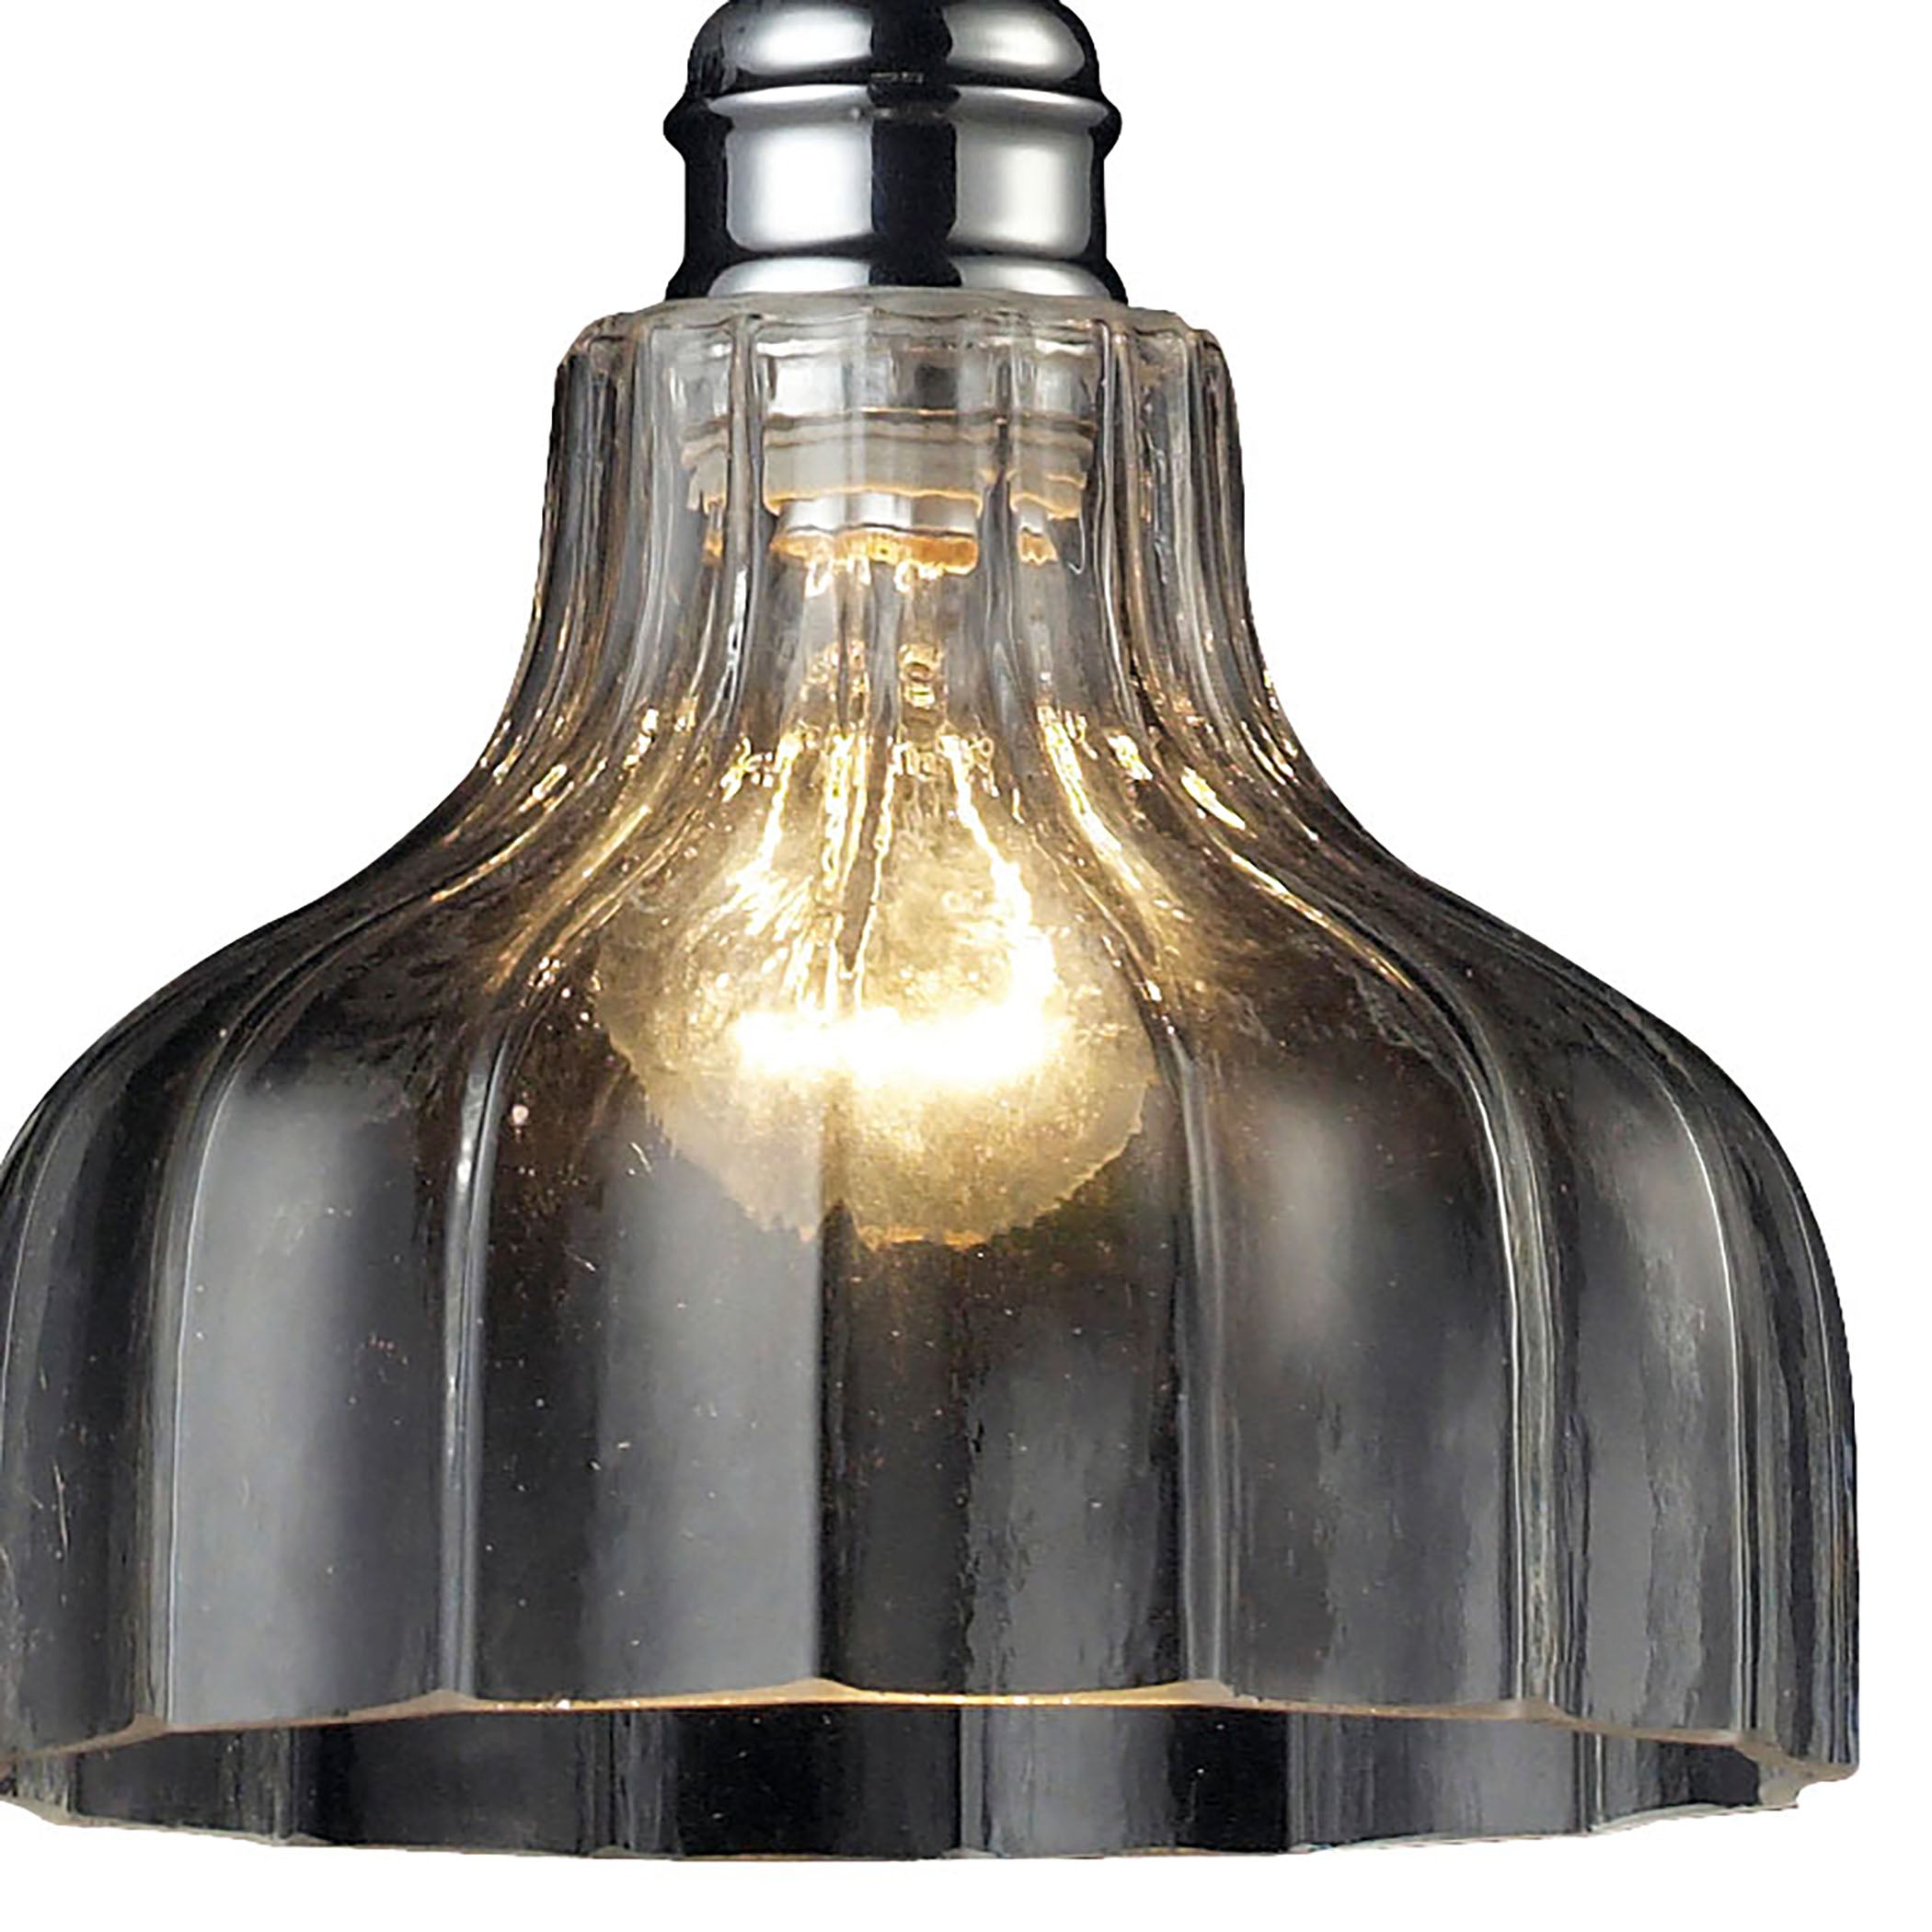 ELK Lighting 46018/1 Danica 1-Light Mini Pendant in Polished Chrome with Clear Glass